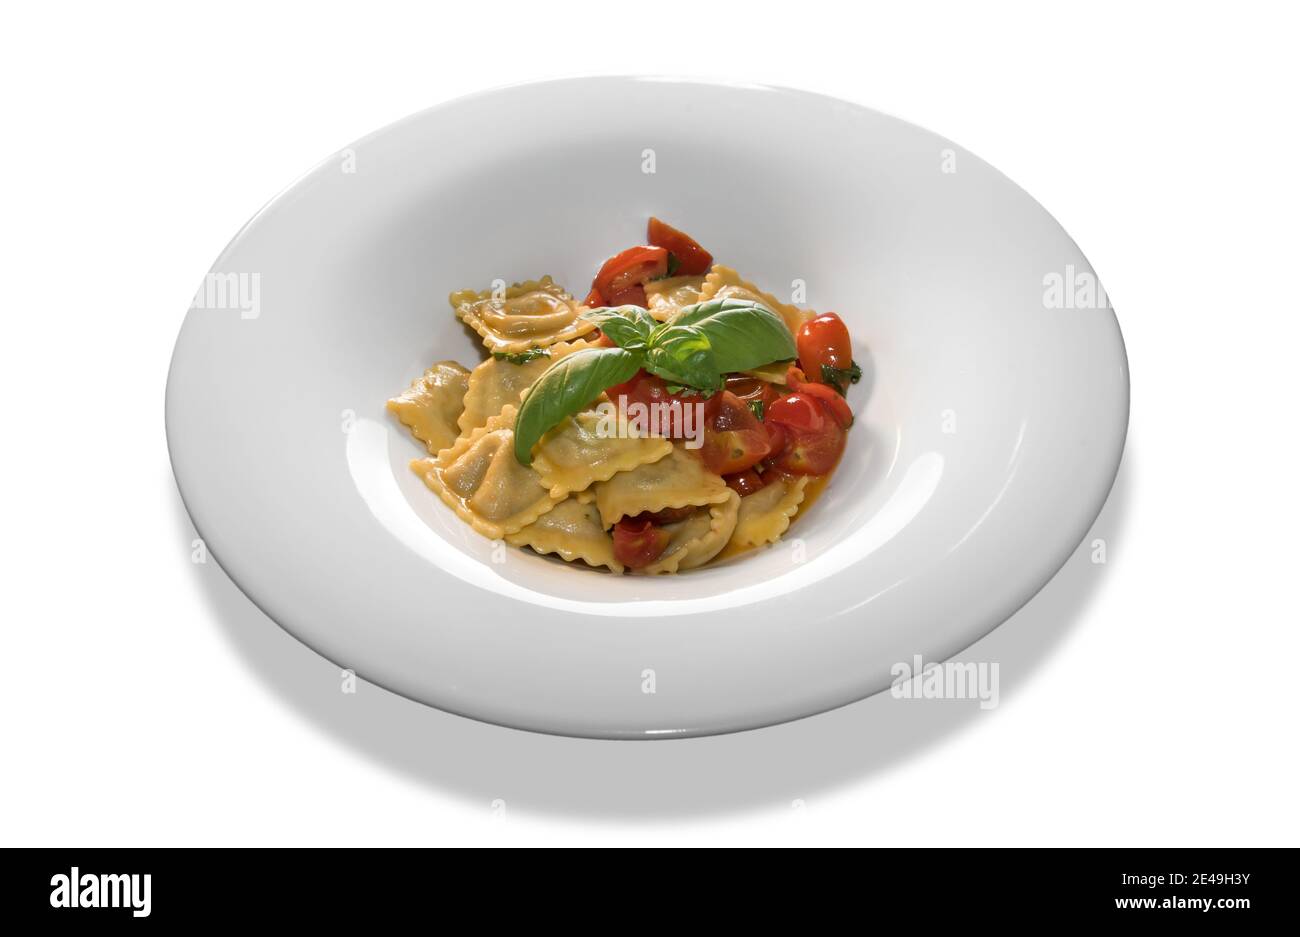 ravioli pasta with tomato sauce and sliced cherry tomatoes and basil leaves in white plate isolated on white background Stock Photo